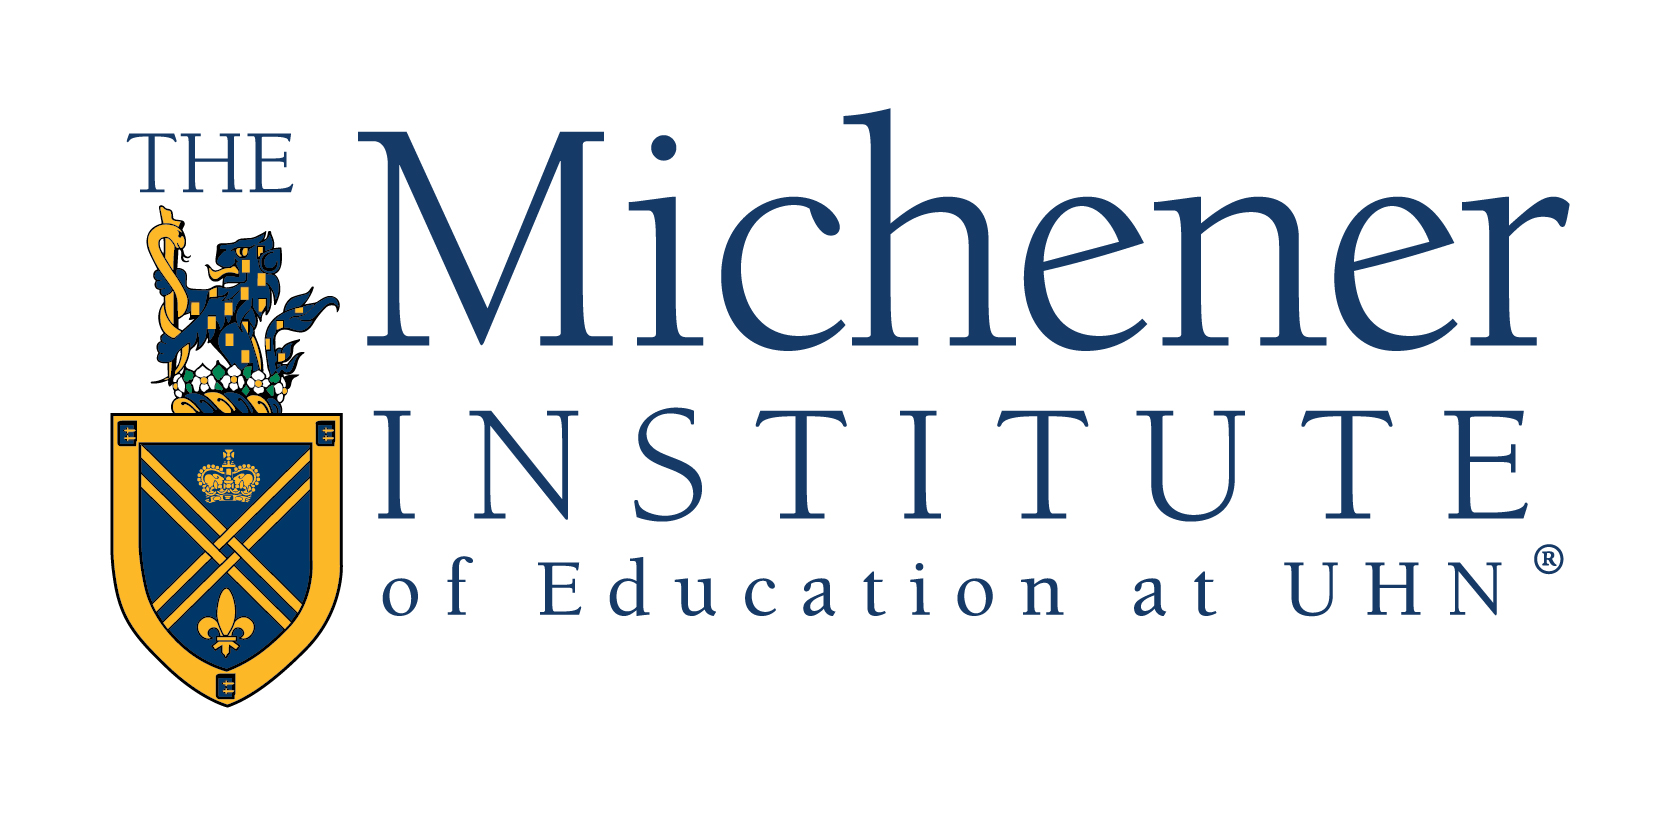 Showcase Image for The Michener Institute of Education at UHN